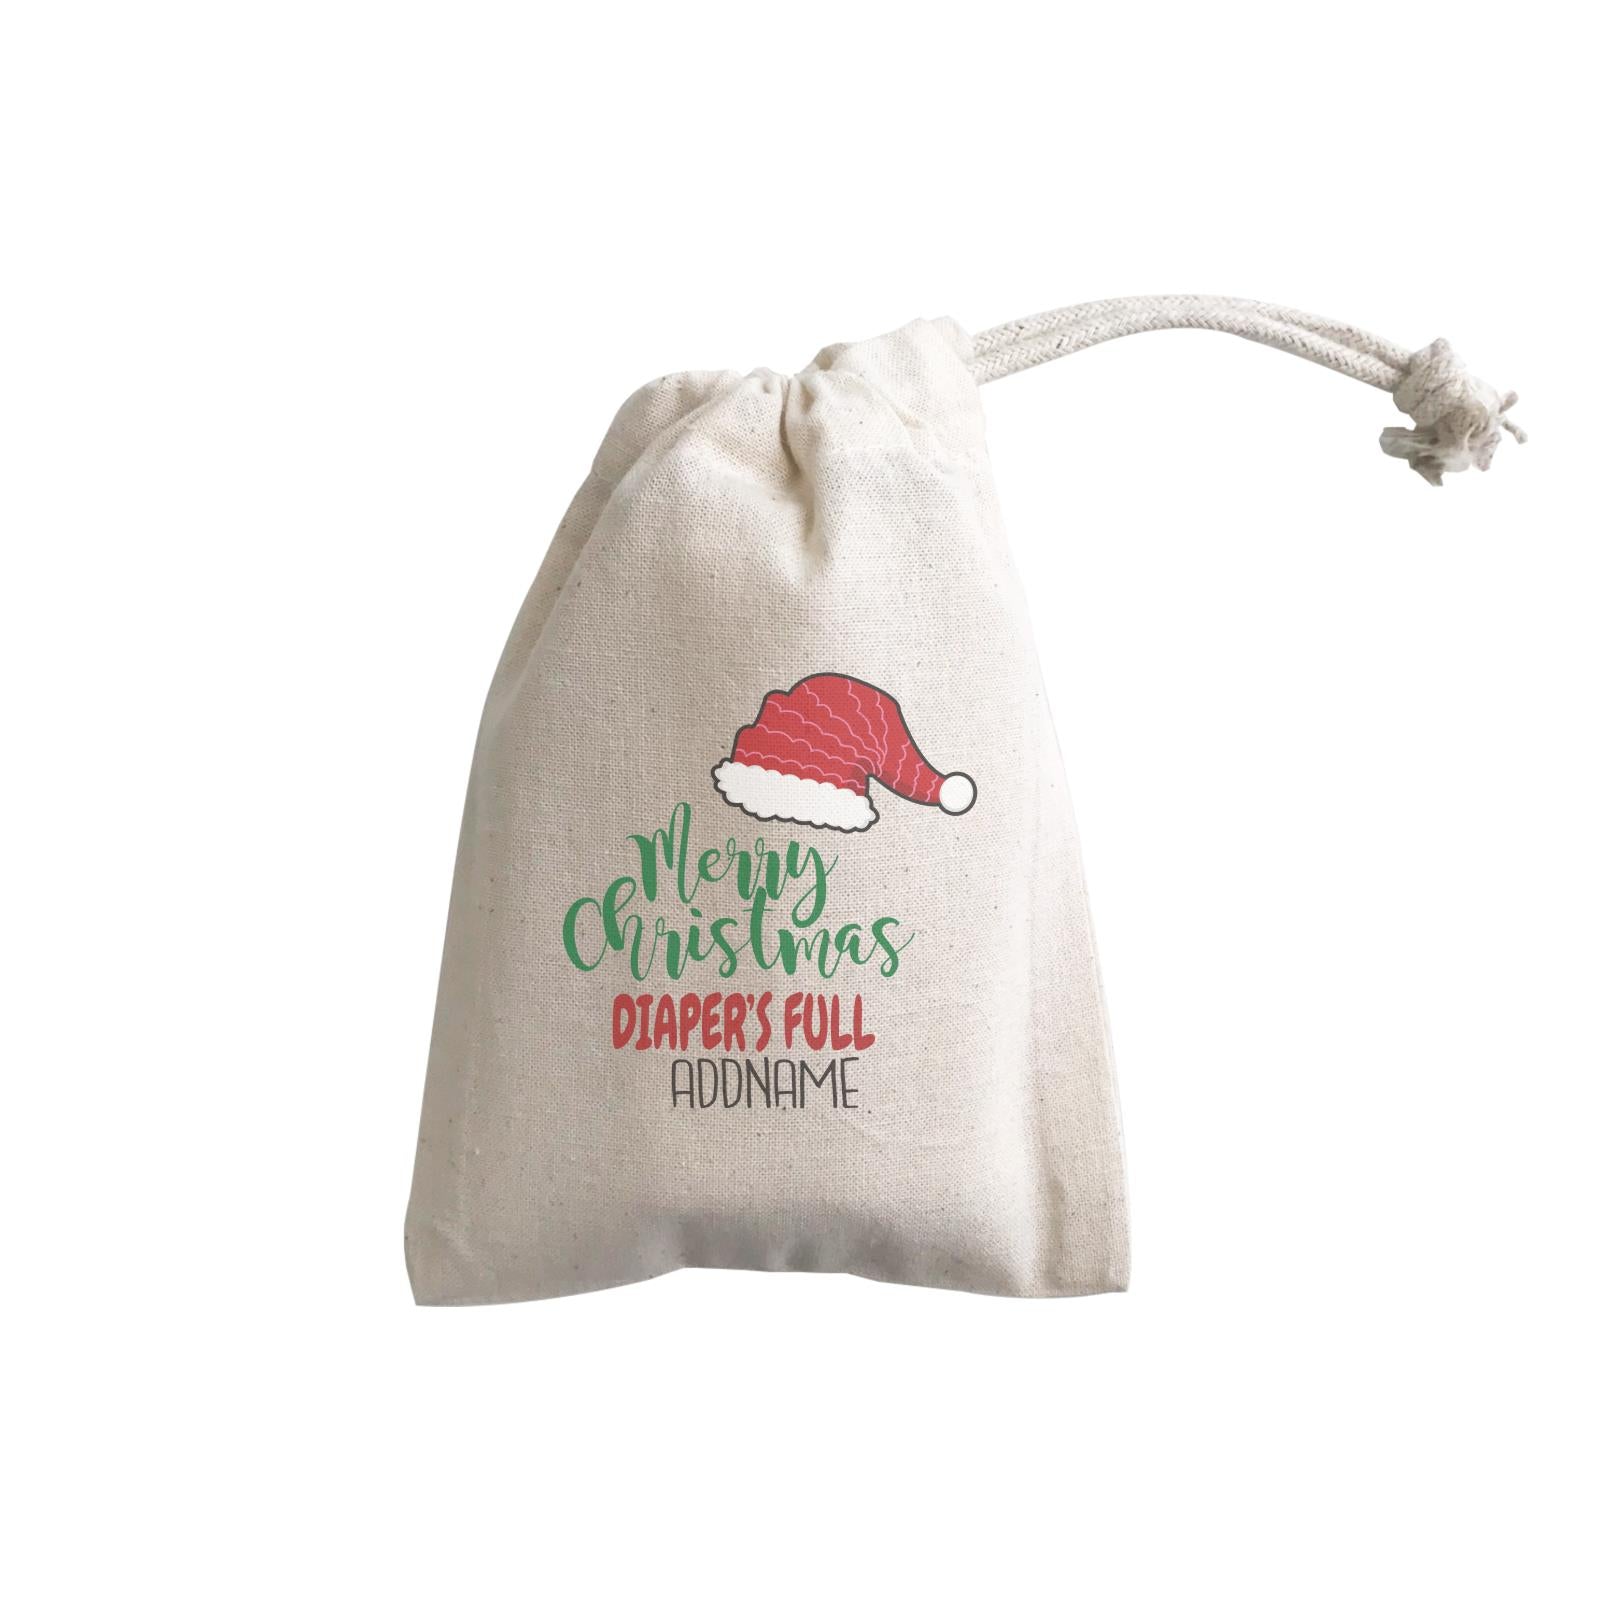 Xmas Merry Christmas Diaper's Full GP Gift Pouch